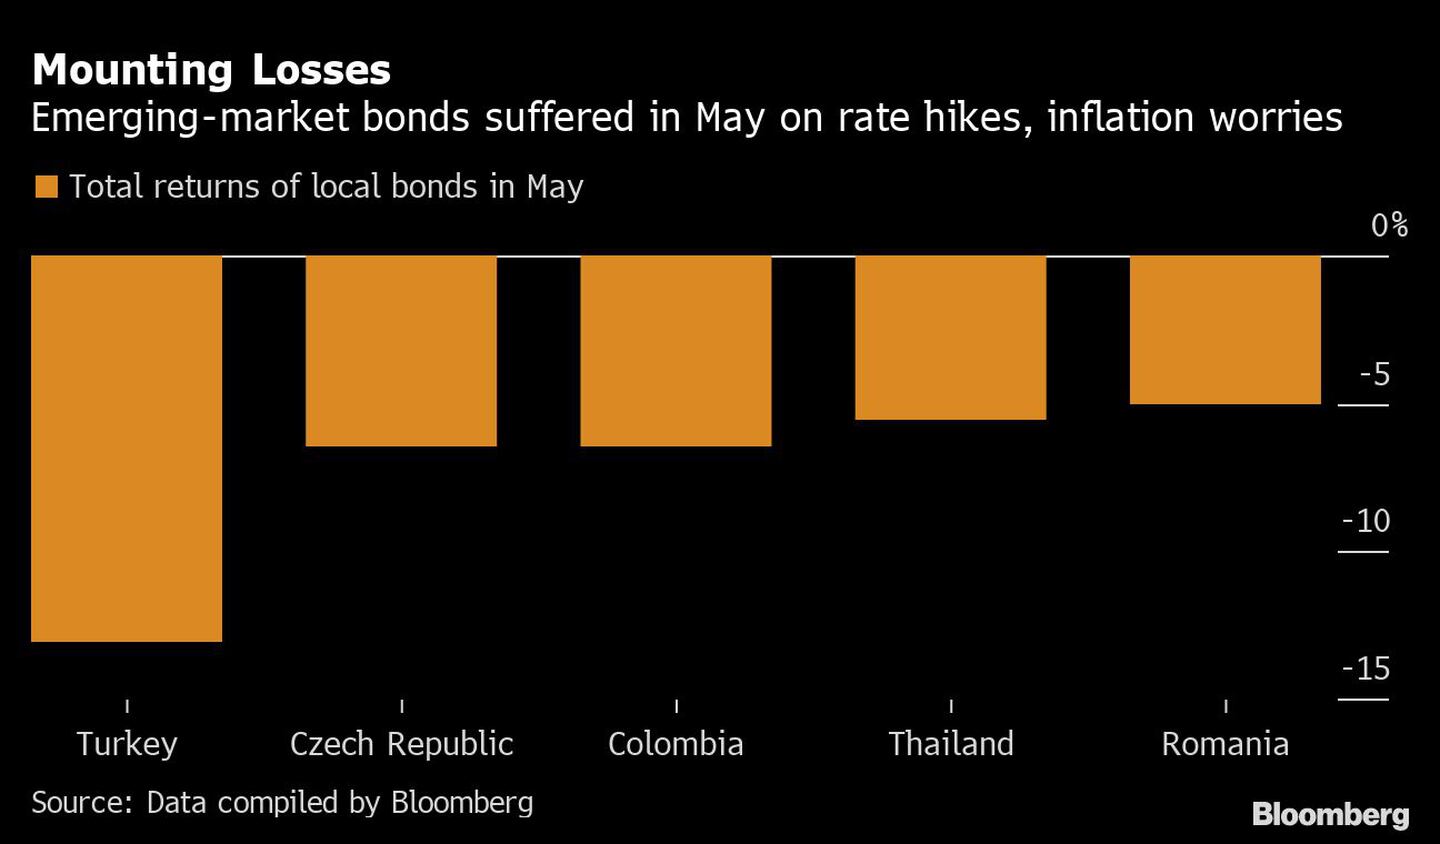 Mounting Losses | Emerging-market bonds suffered in May on rate hikes, inflation worriesdfd